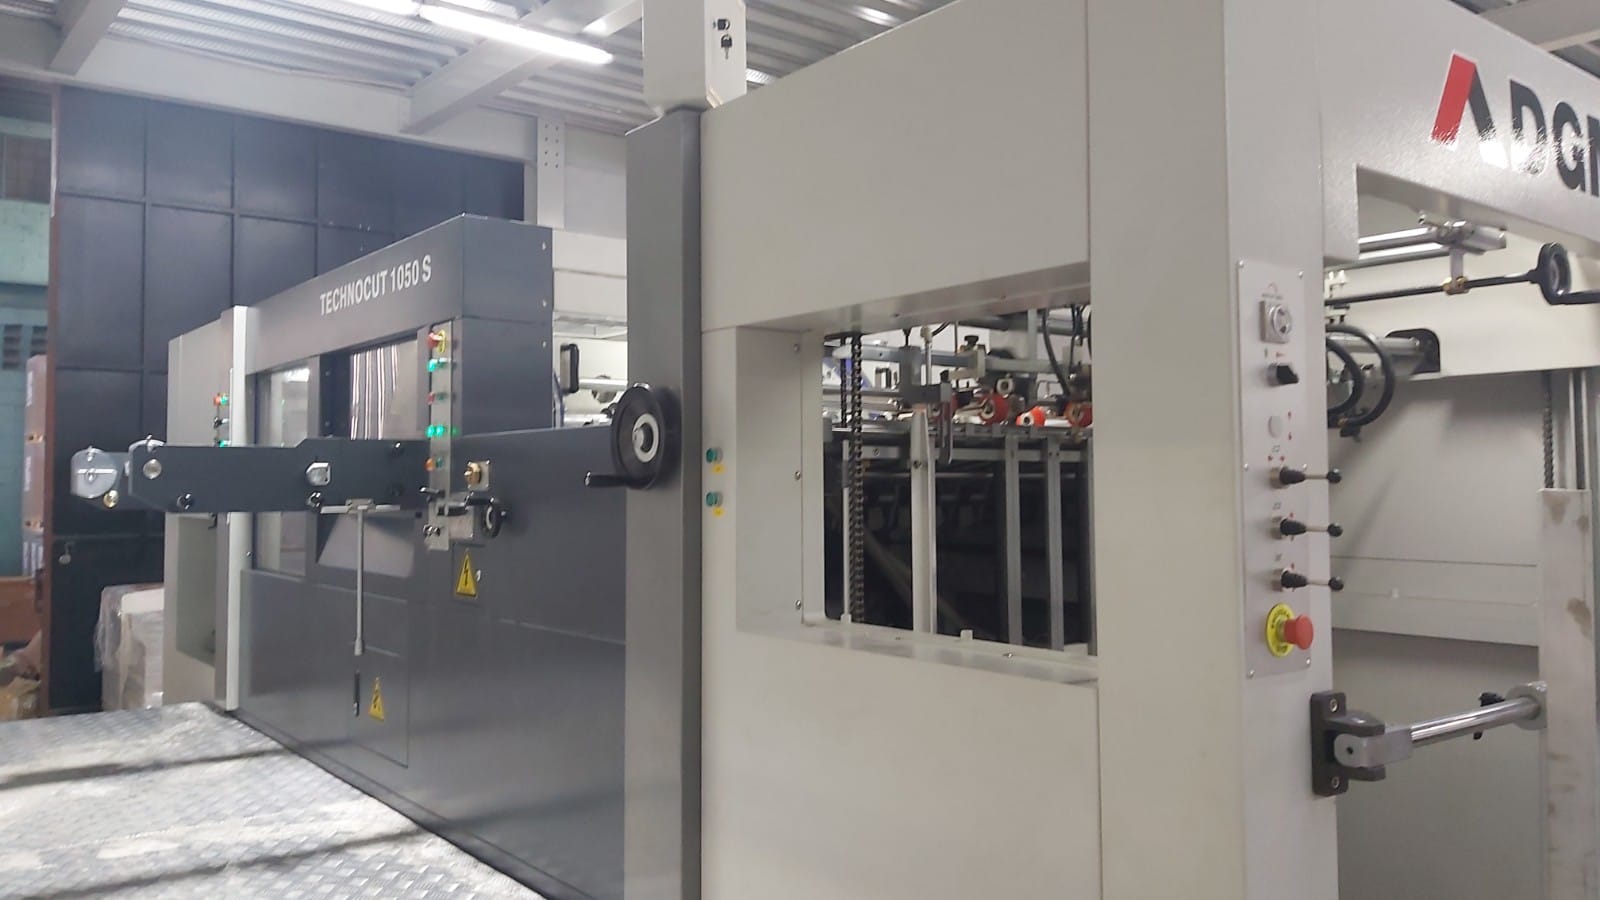 Successful installation by The Royo Machinery Team - DGM Technocut 1050S Automatic Die Cutter